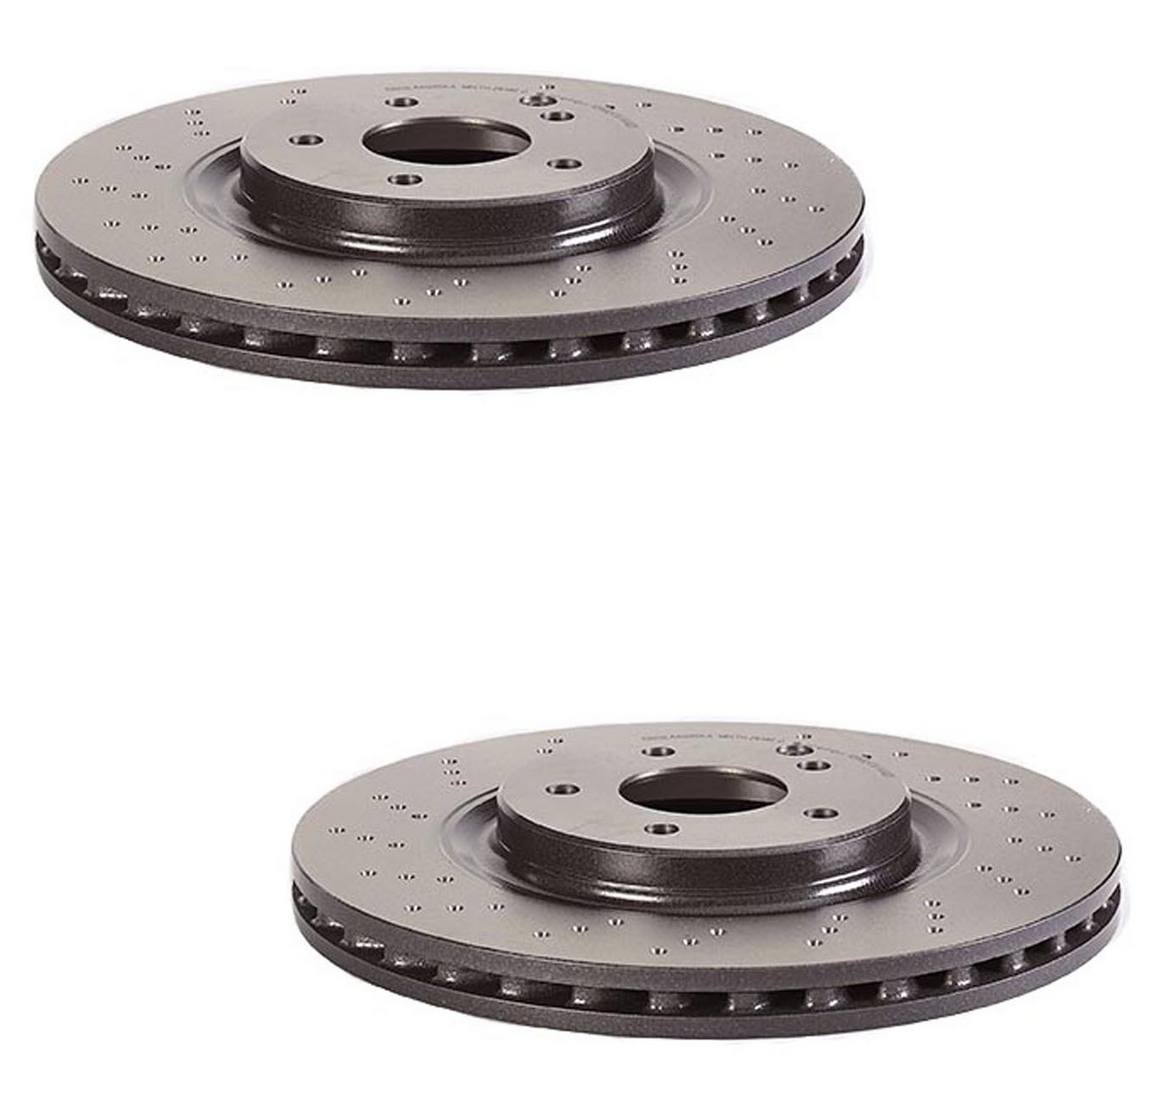 Mercedes Brakes Kit - Pads & Rotors Front and Rear (330mm/290mm) (Low-Met) 210423101264 - Brembo 4015171KIT